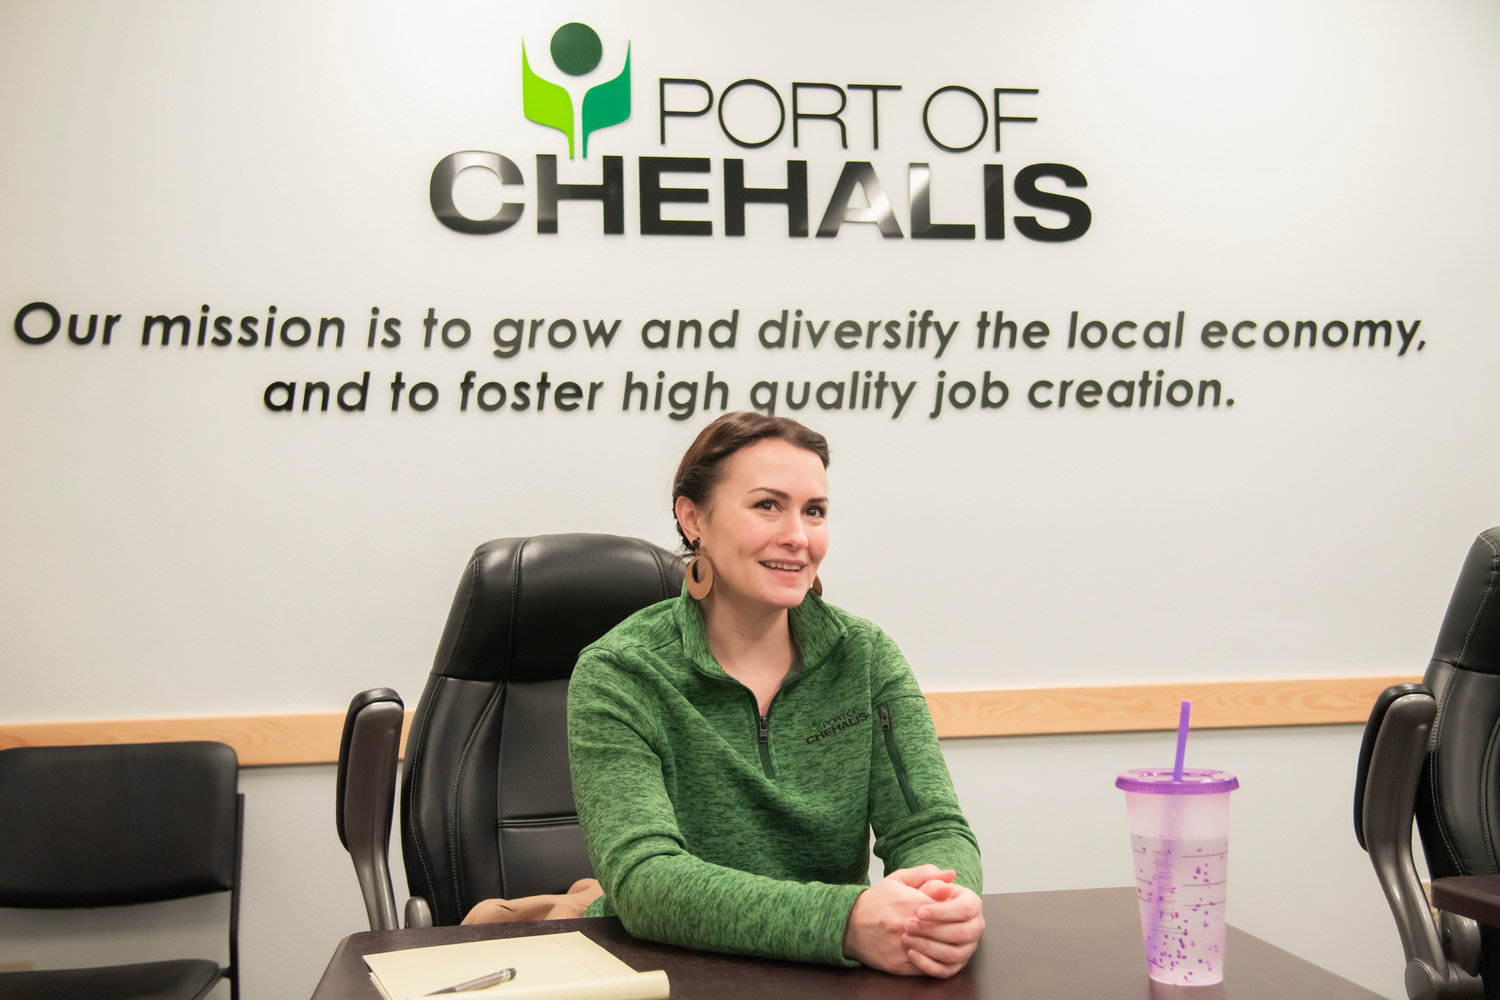 FILE PHOTO — Lindsey Senter, chief executive officer for the Port of Chehalis